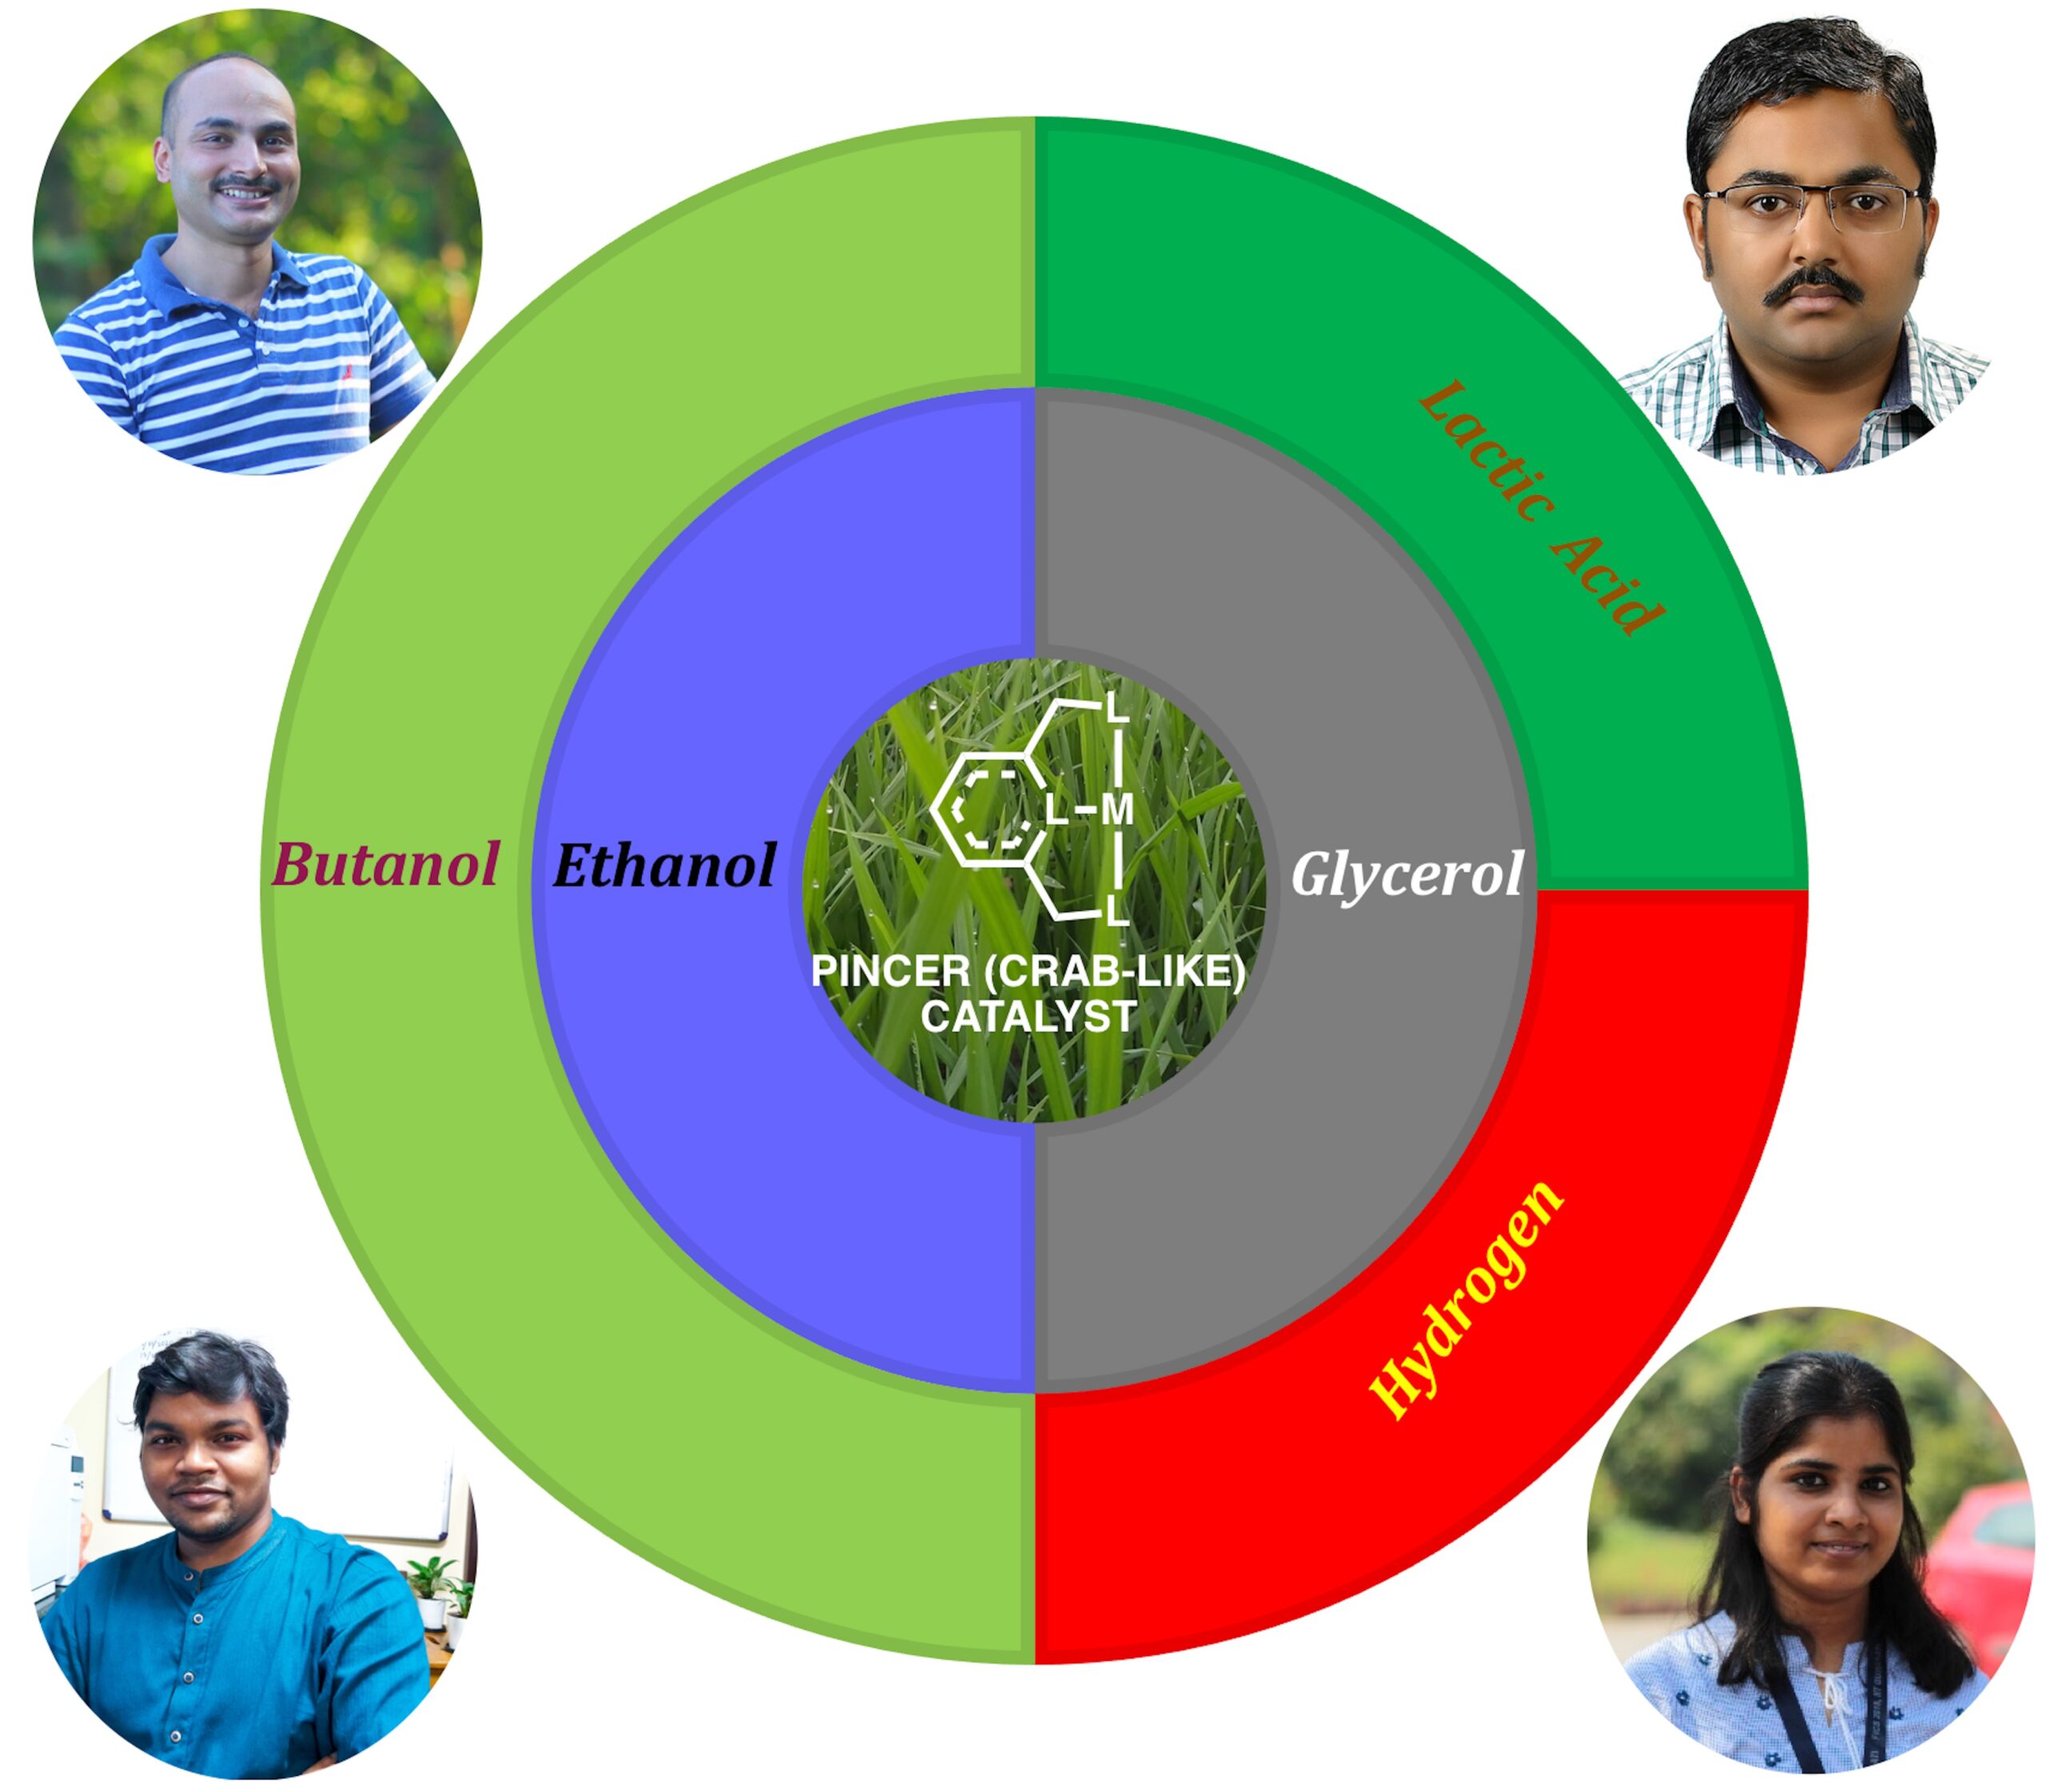 IIT Guwahati Scientists make Breakthrough in Developing Efficient Catalytic Systems for Biofuel and Lactic Acid Production